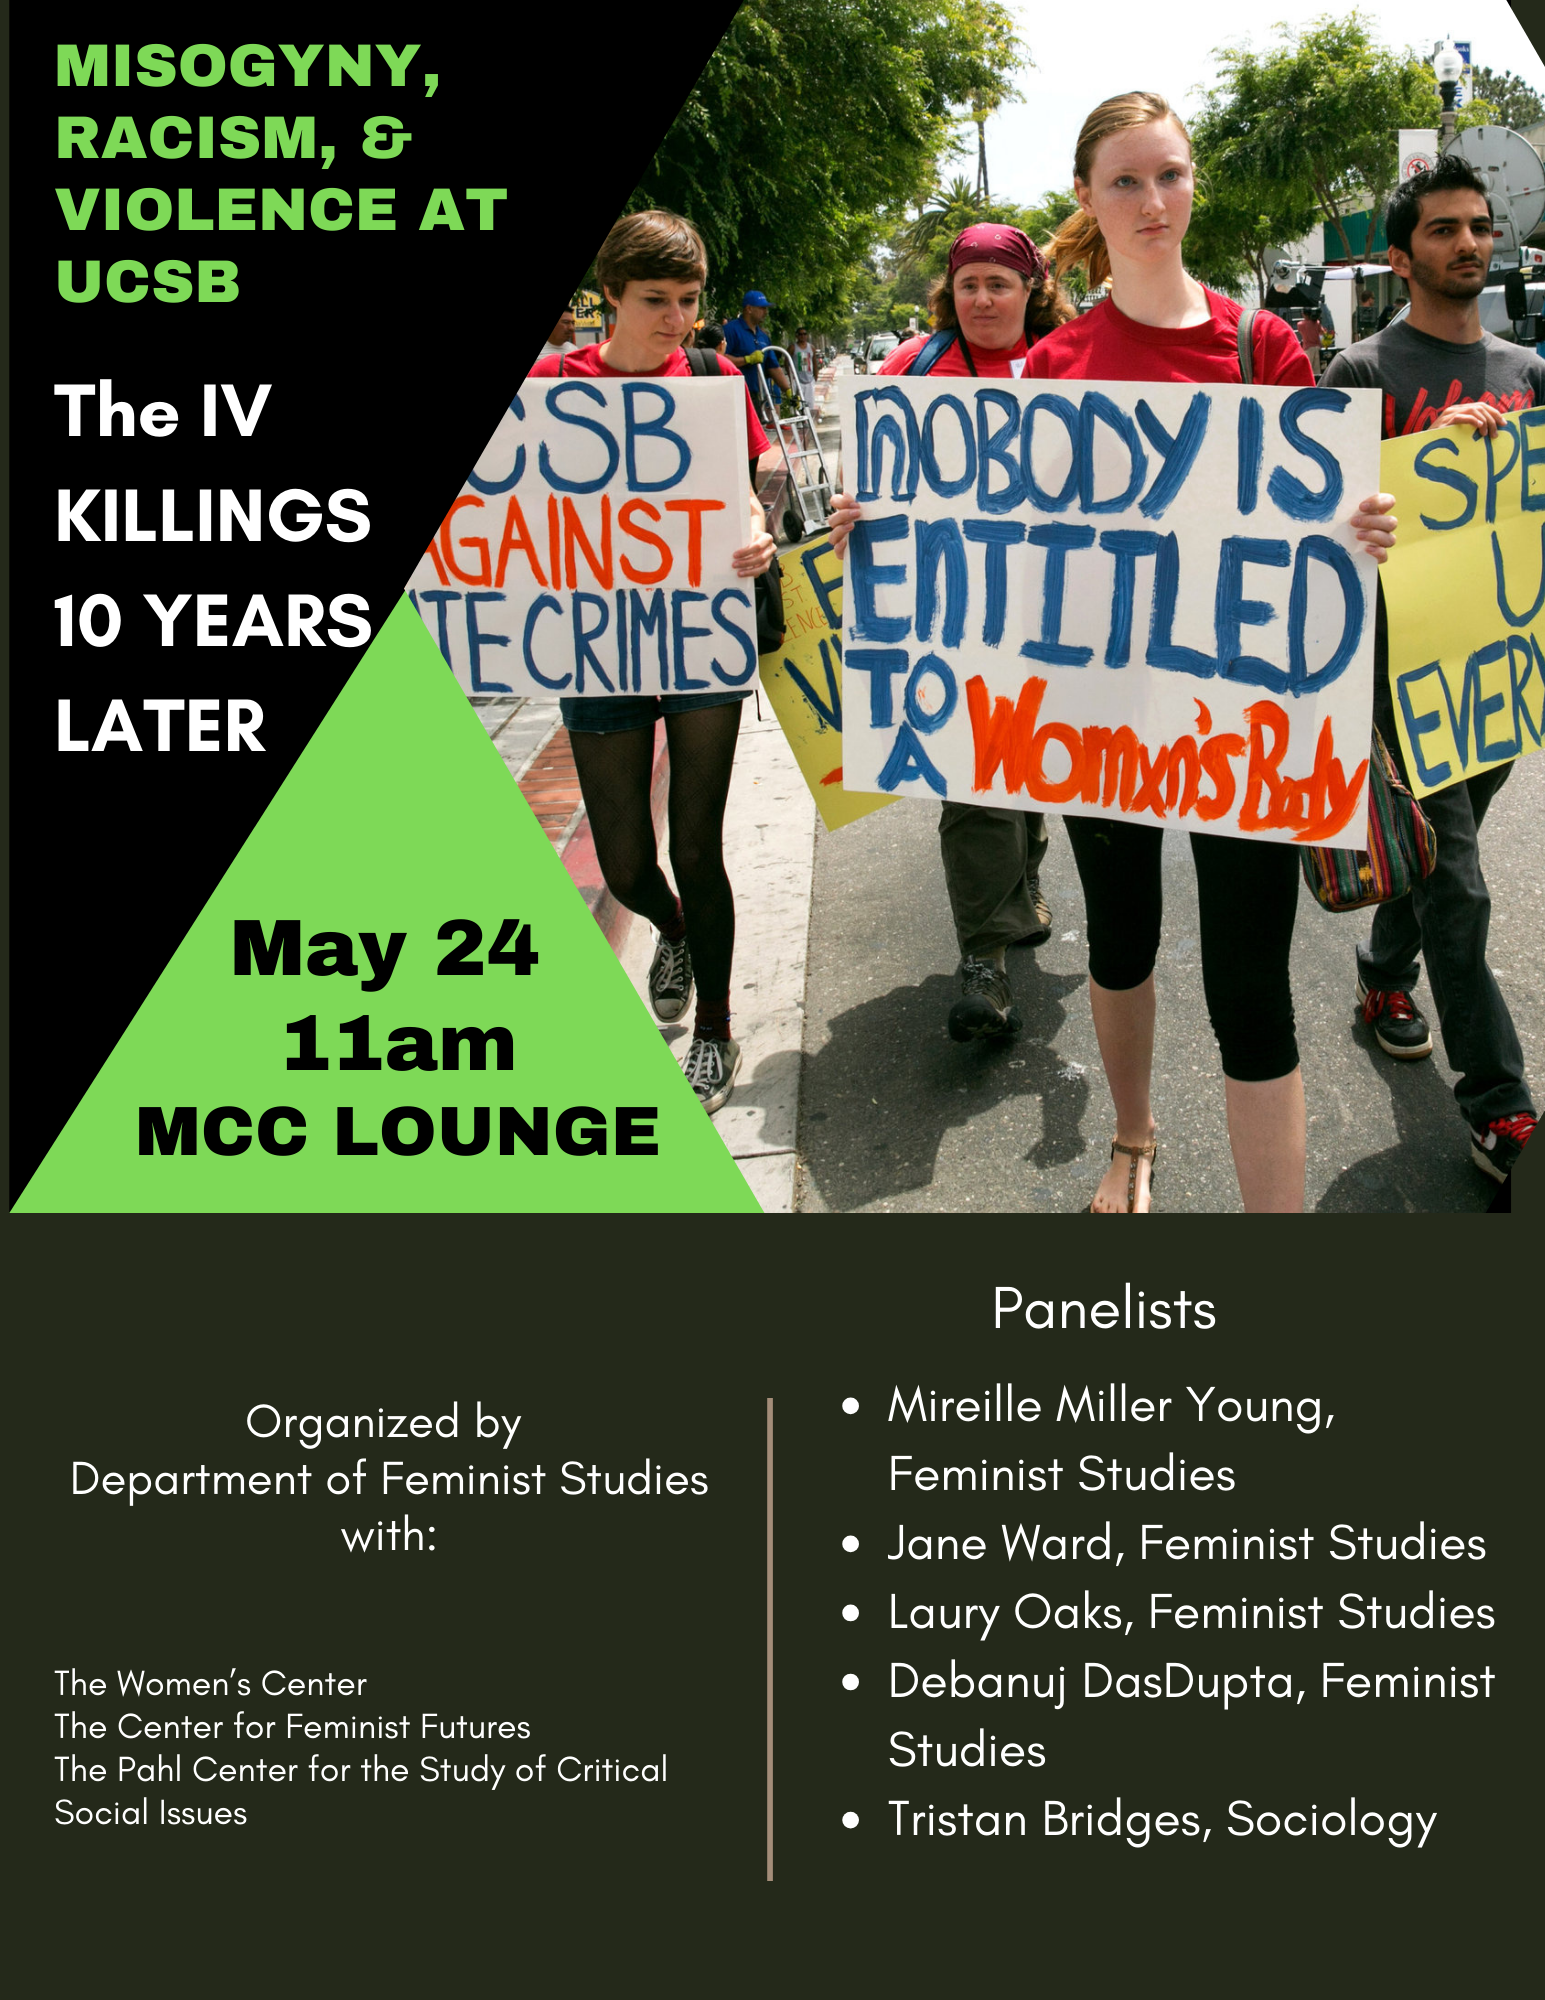 “Misogyny, Racism, & Violence at UCSB: The IV Killings 10 Years Later”